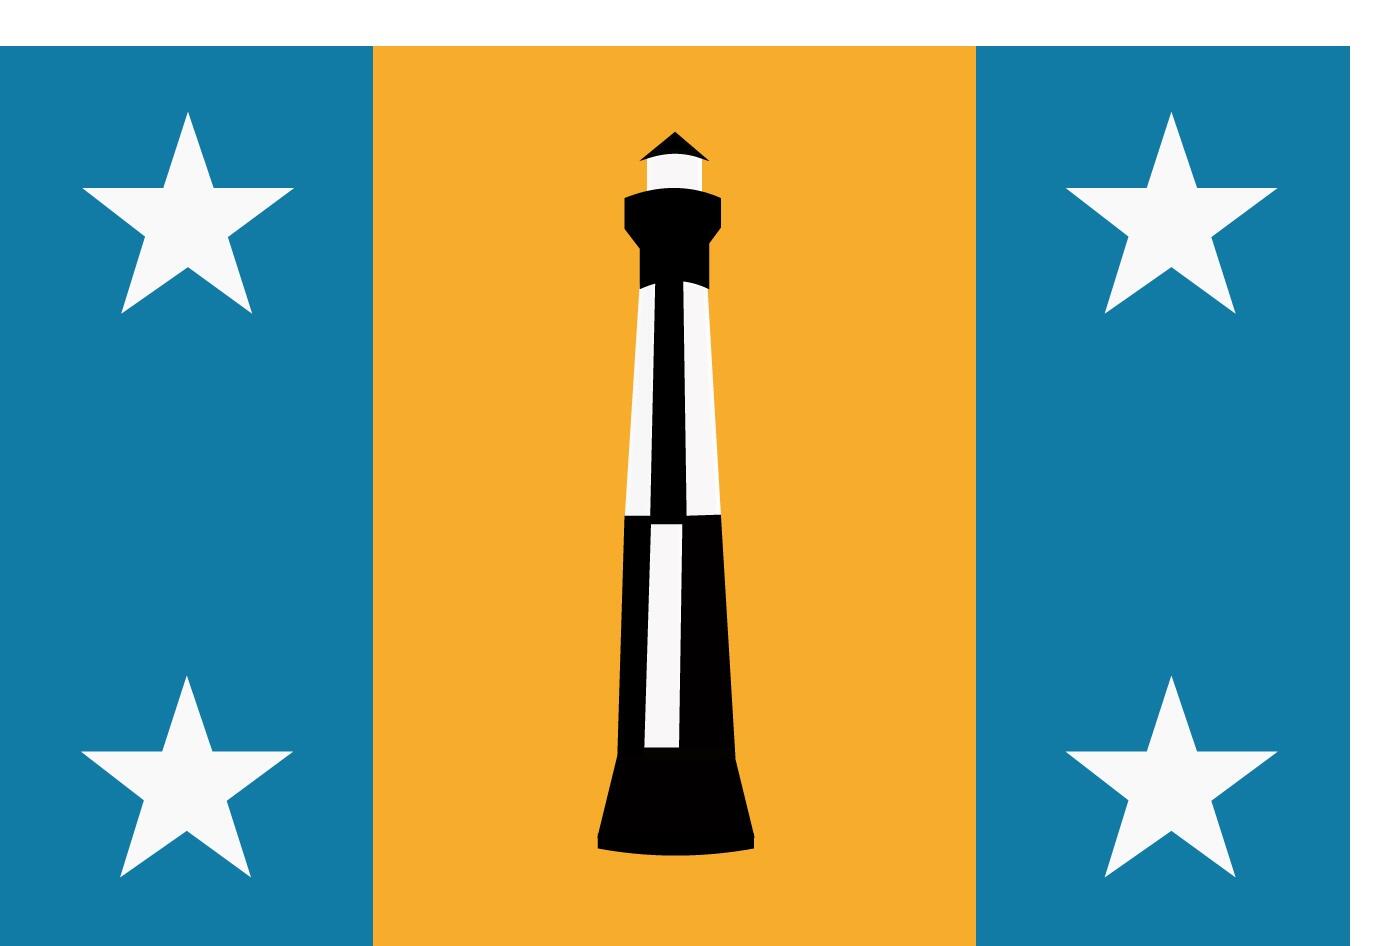 A lighthouse surrounded by a yellow background. The right and left edges of the flag are blue with large stars at the top and bottom.